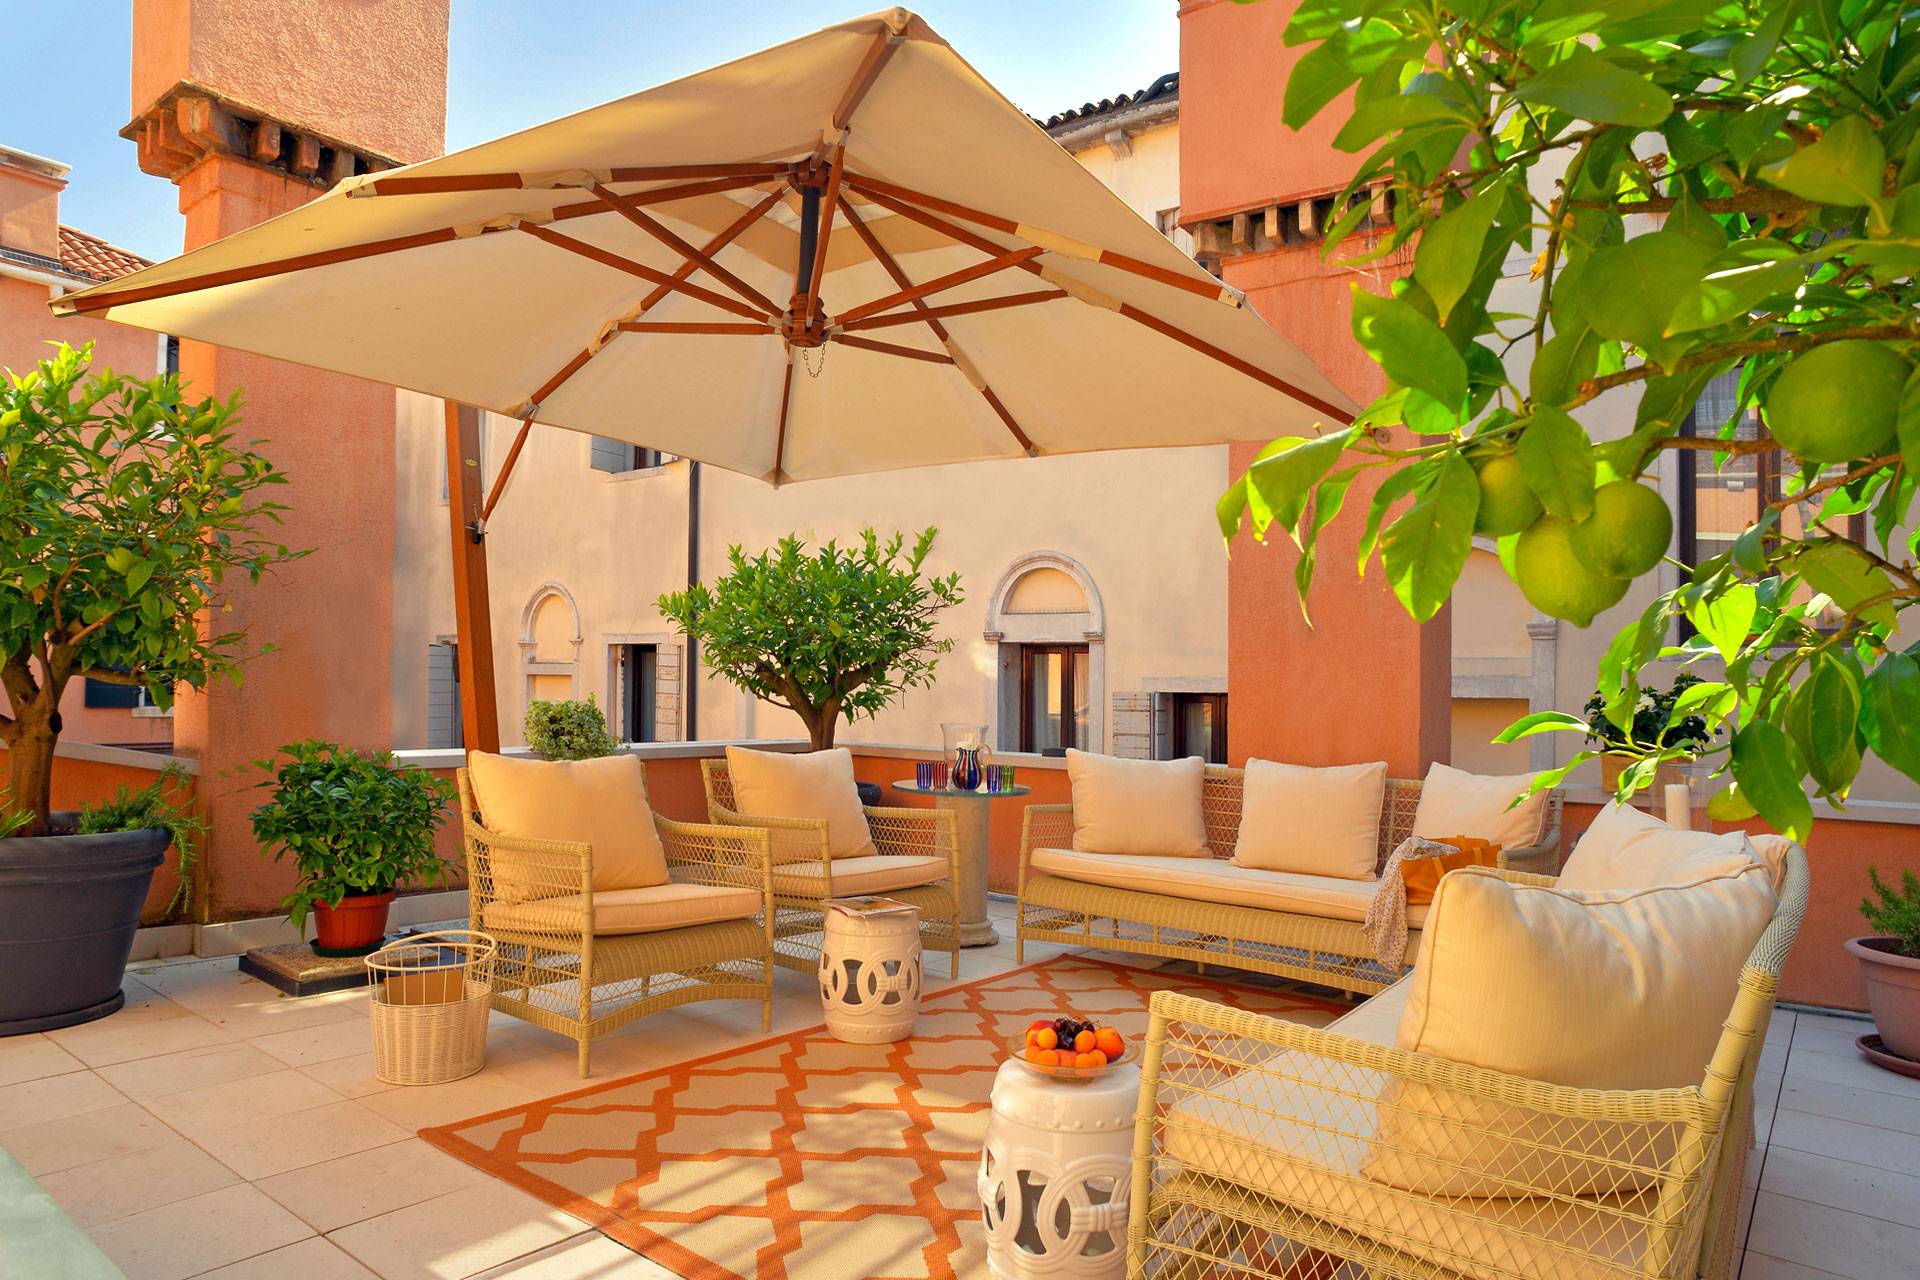 Shared Terrace (for all the guests of the Palazzo)